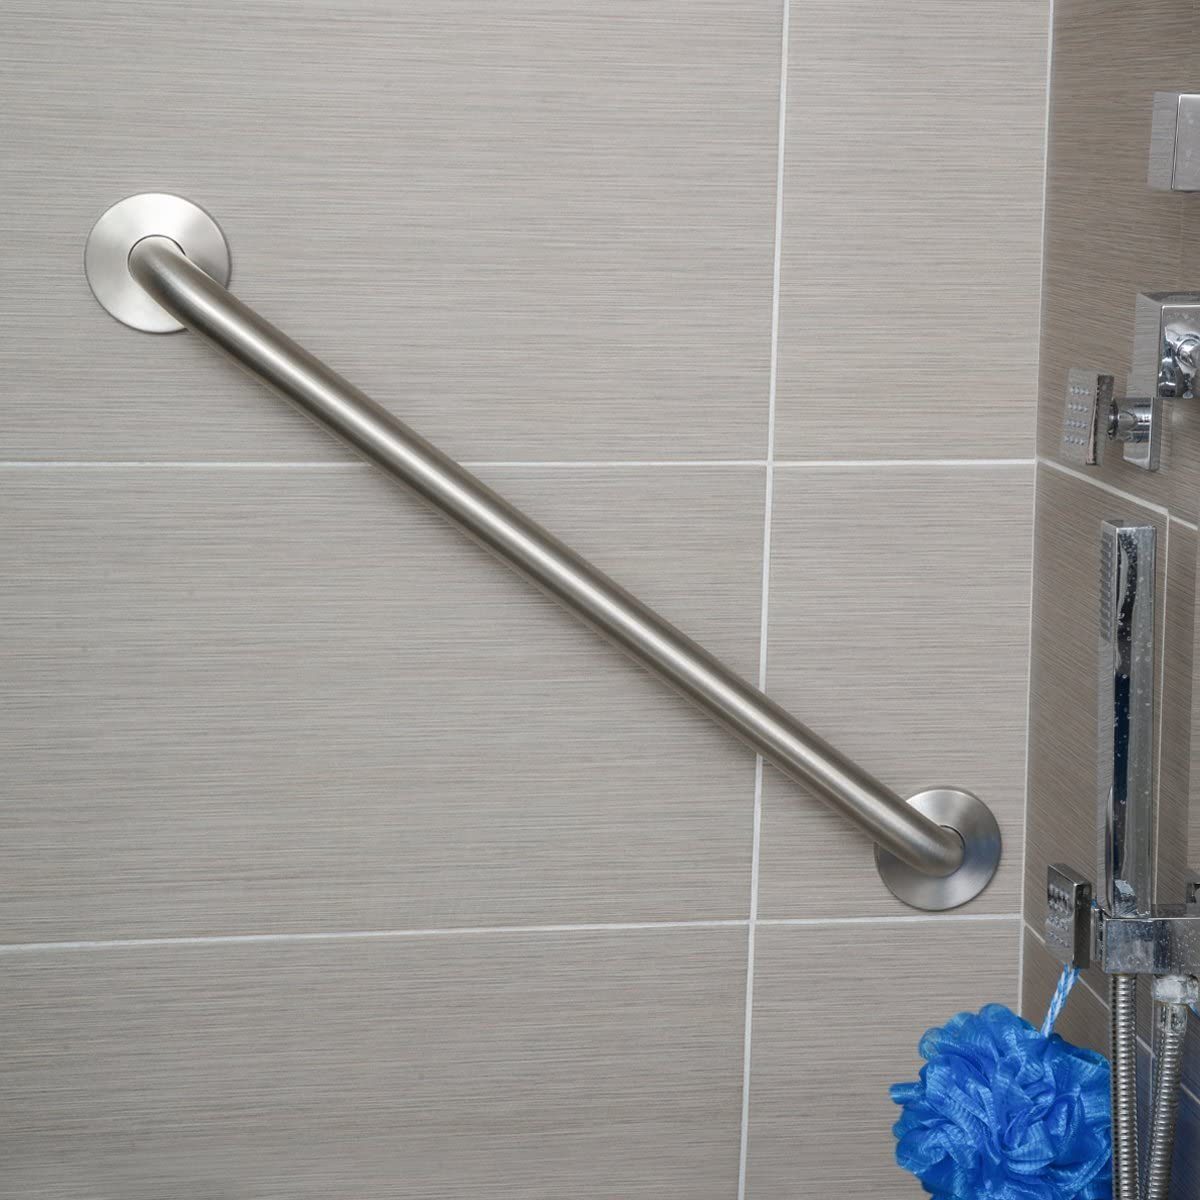 4 Facts to Know About Bathroom Grab Bars